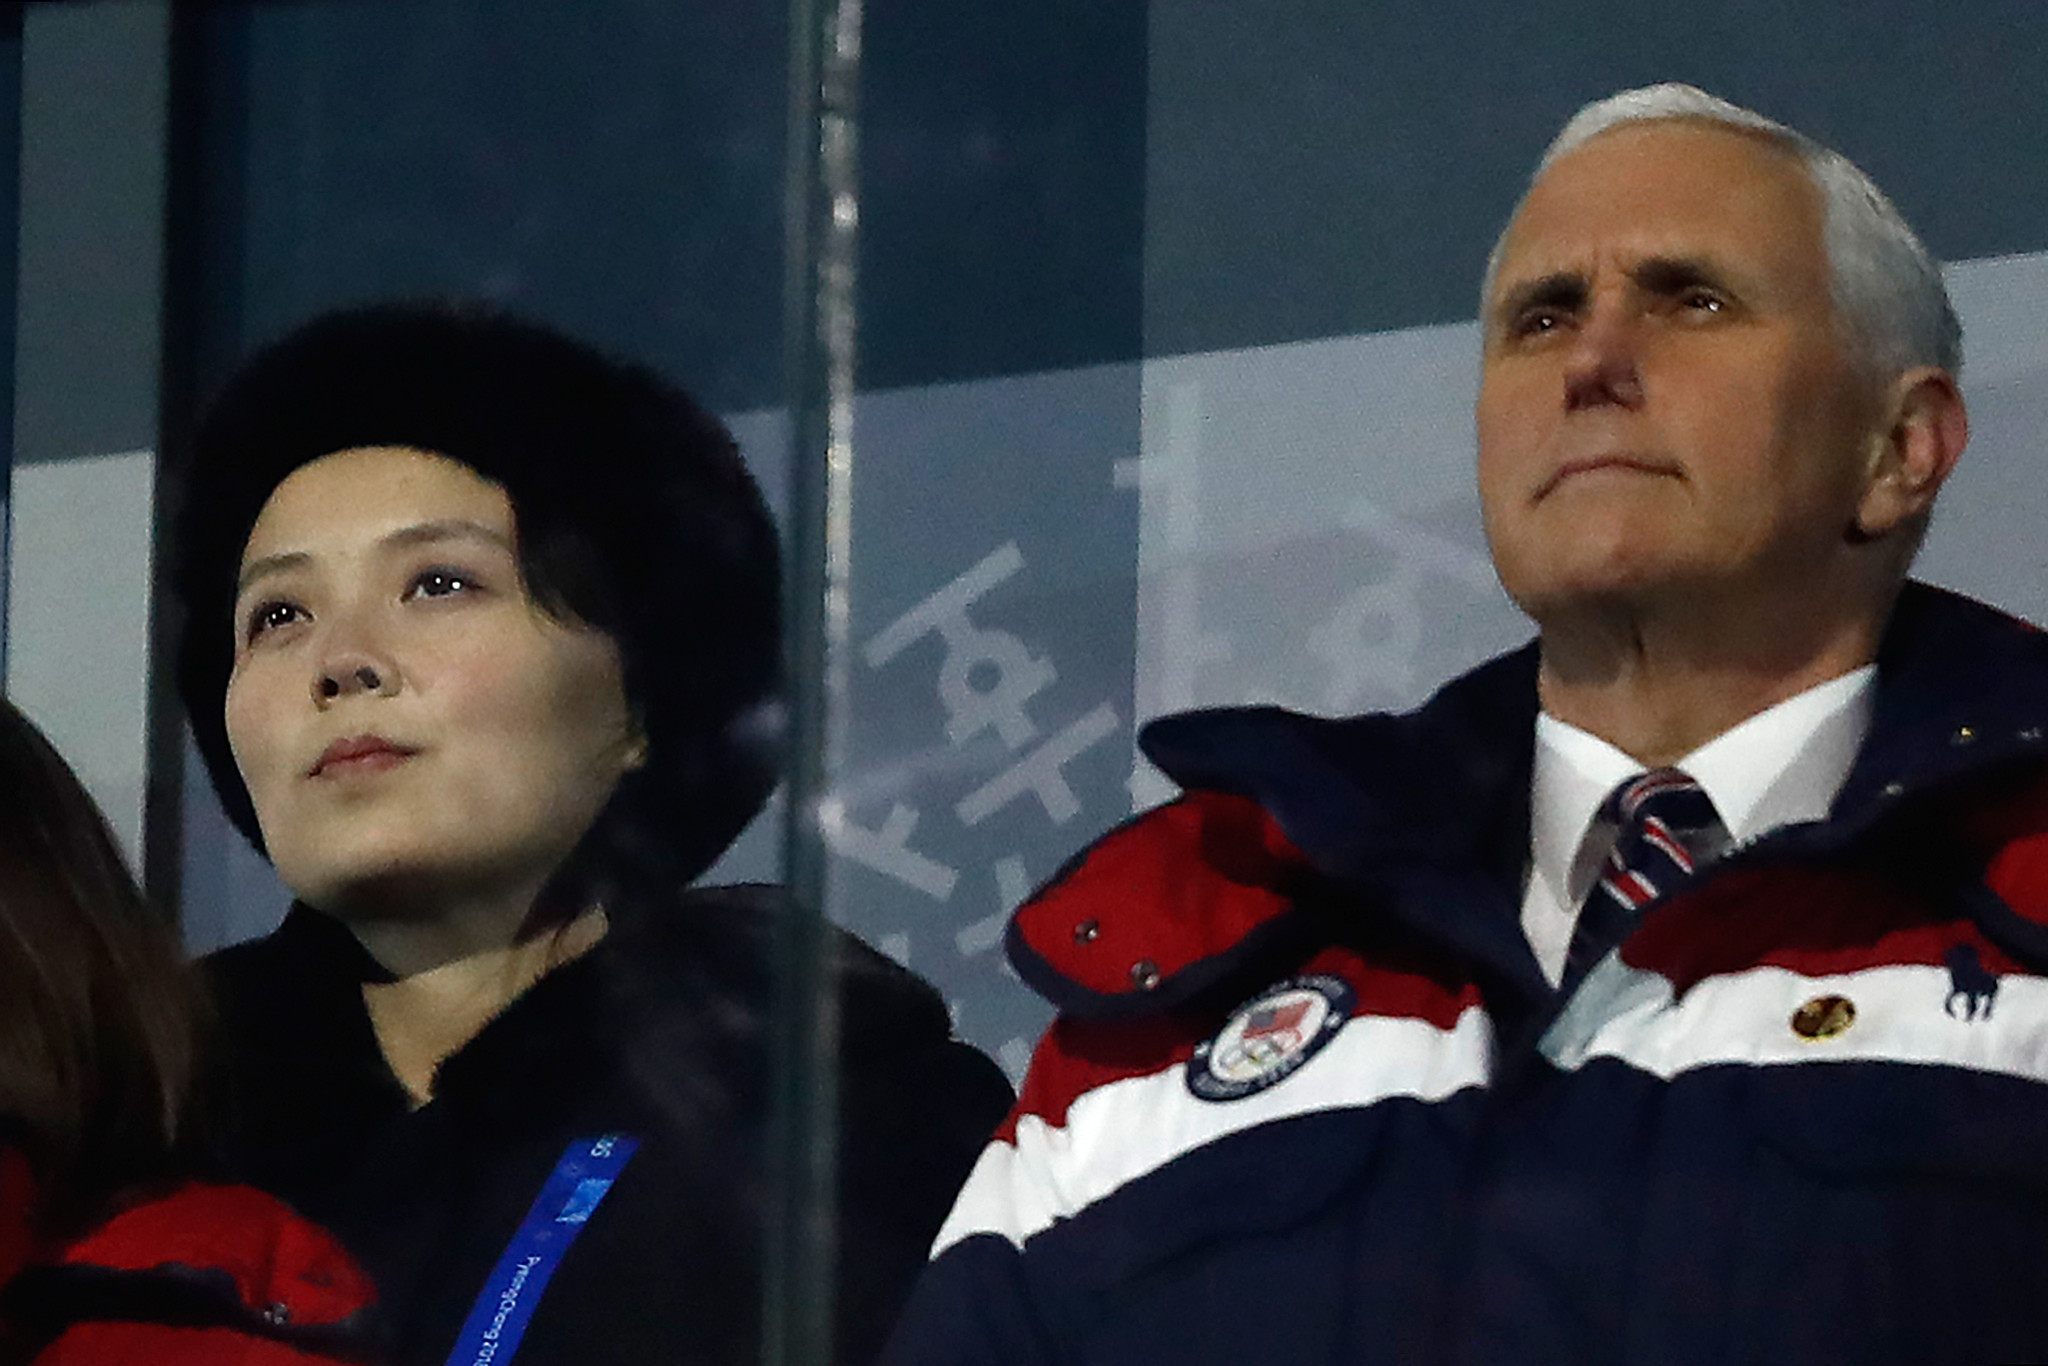 US Vice-President Mike Pence sat close to the sister of North Korean leader Kim Jong-un ©Getty Images